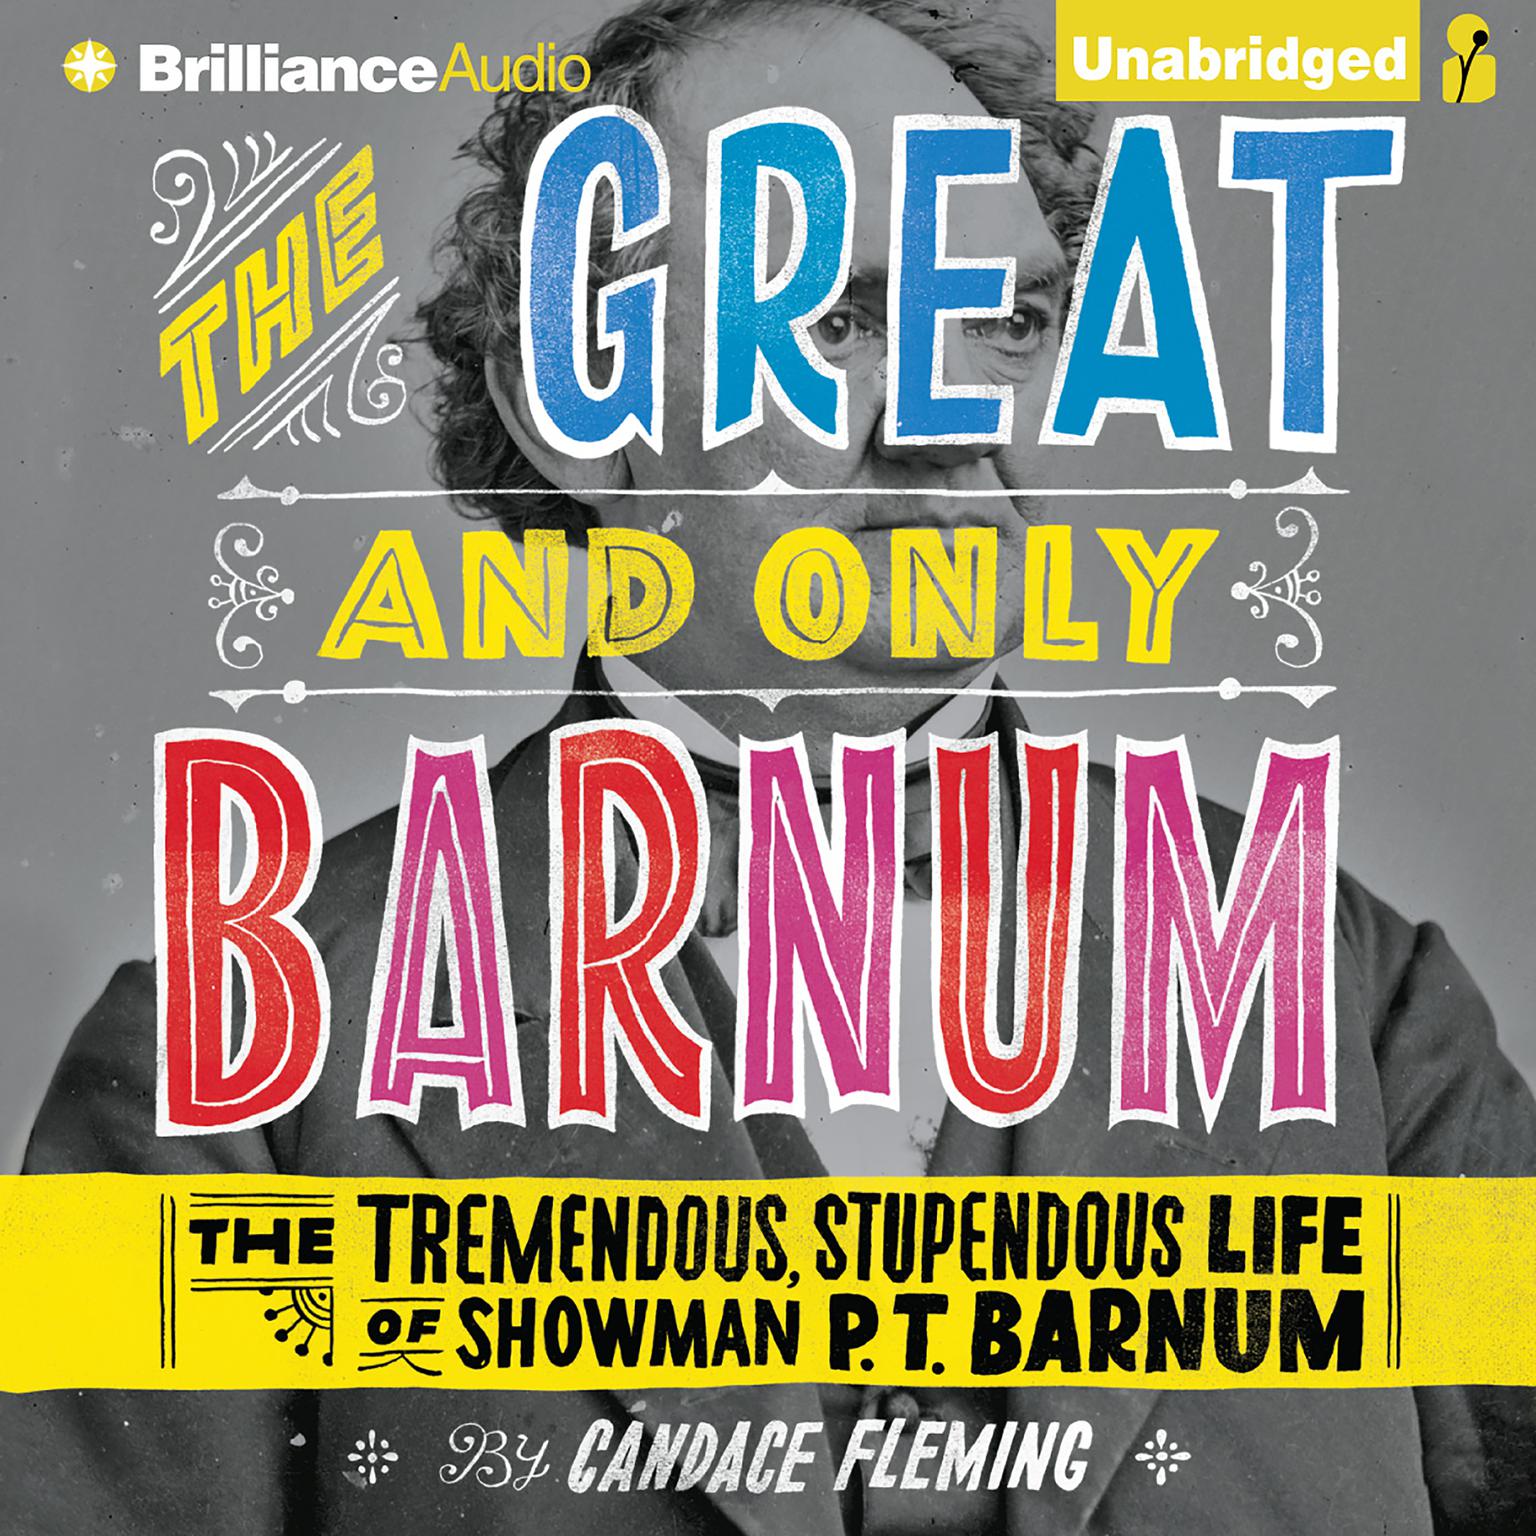 The Great and Only Barnum: The Tremendous, Stupendous Life of Showman P. T. Barnum Audiobook, by Candace Fleming